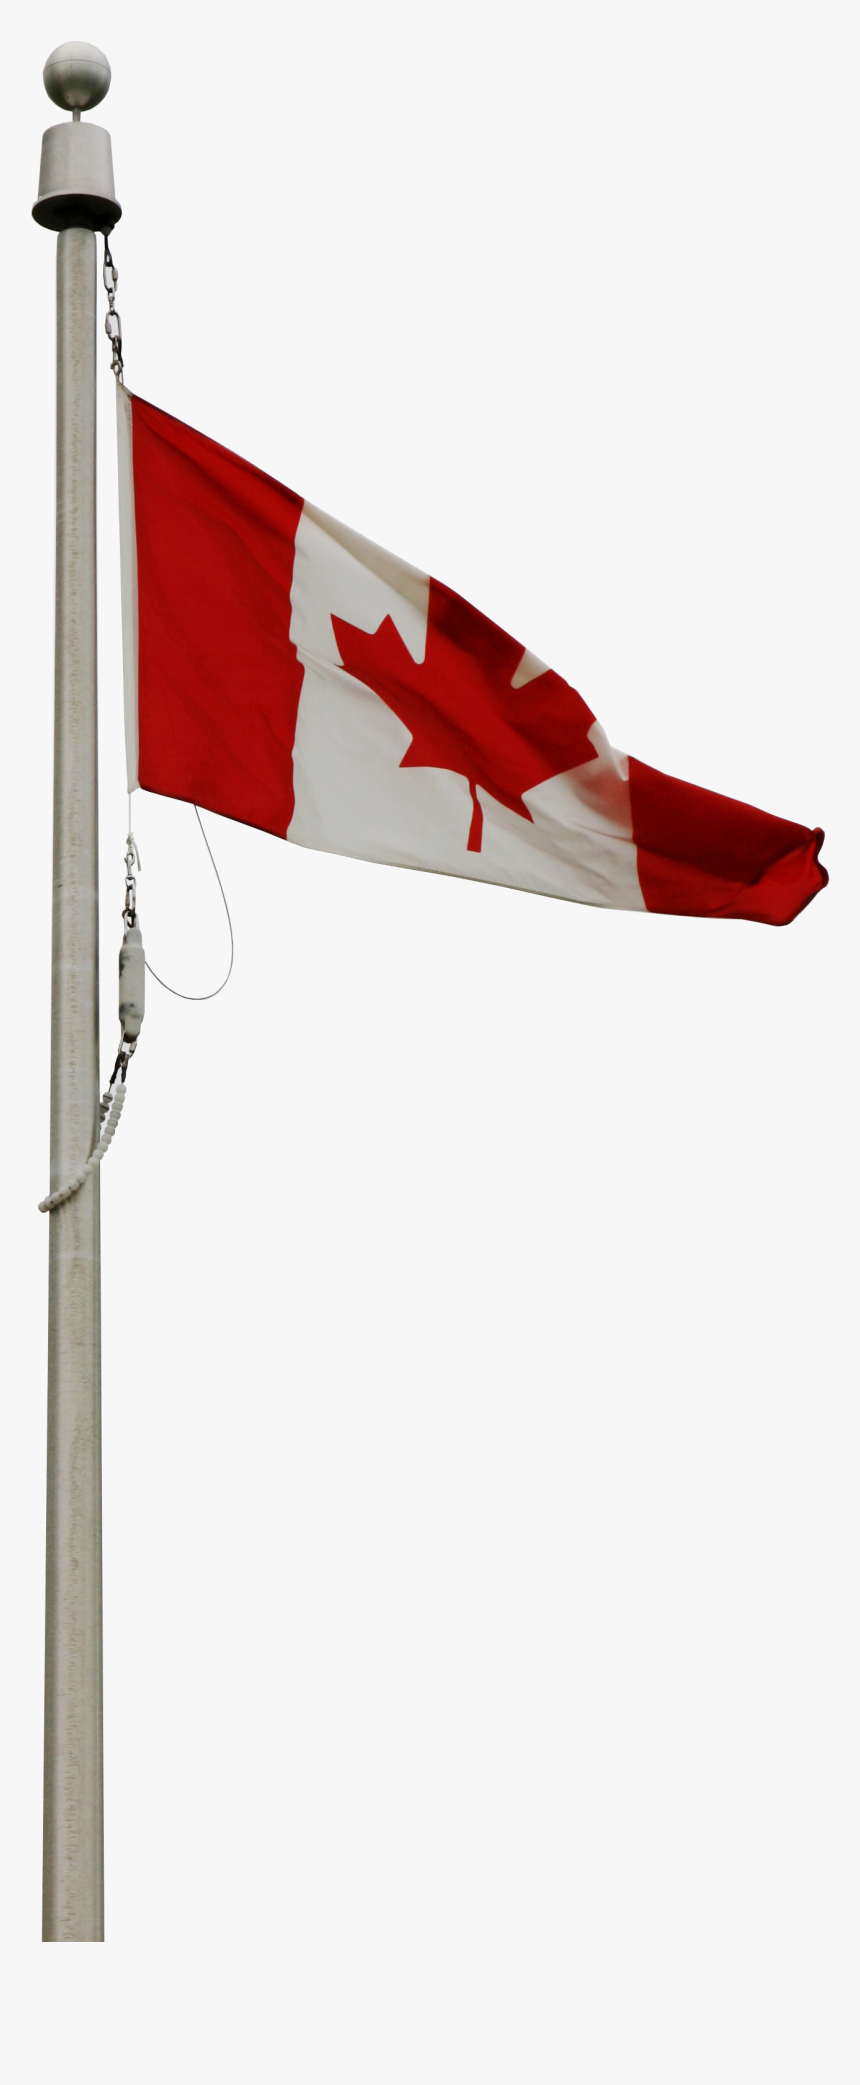 Canada Flag Pole Png, Transparent Png, Free Download